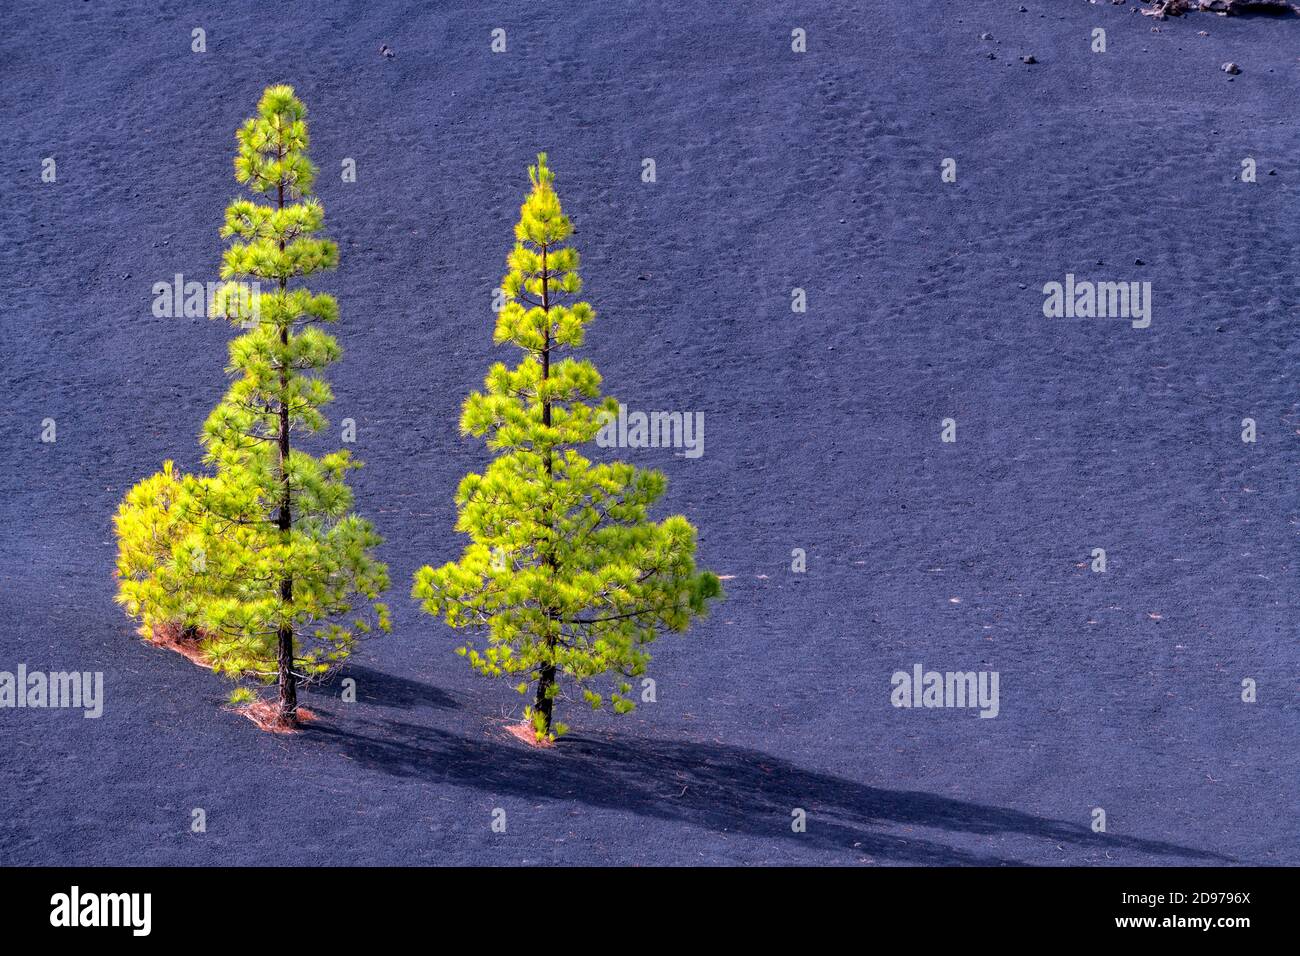 Canary pines on the island of Tenerife (Canary Islands). Canary Island pine (Pinus canariensis) is a magnificent endemic species of the archipelago, v Stock Photo